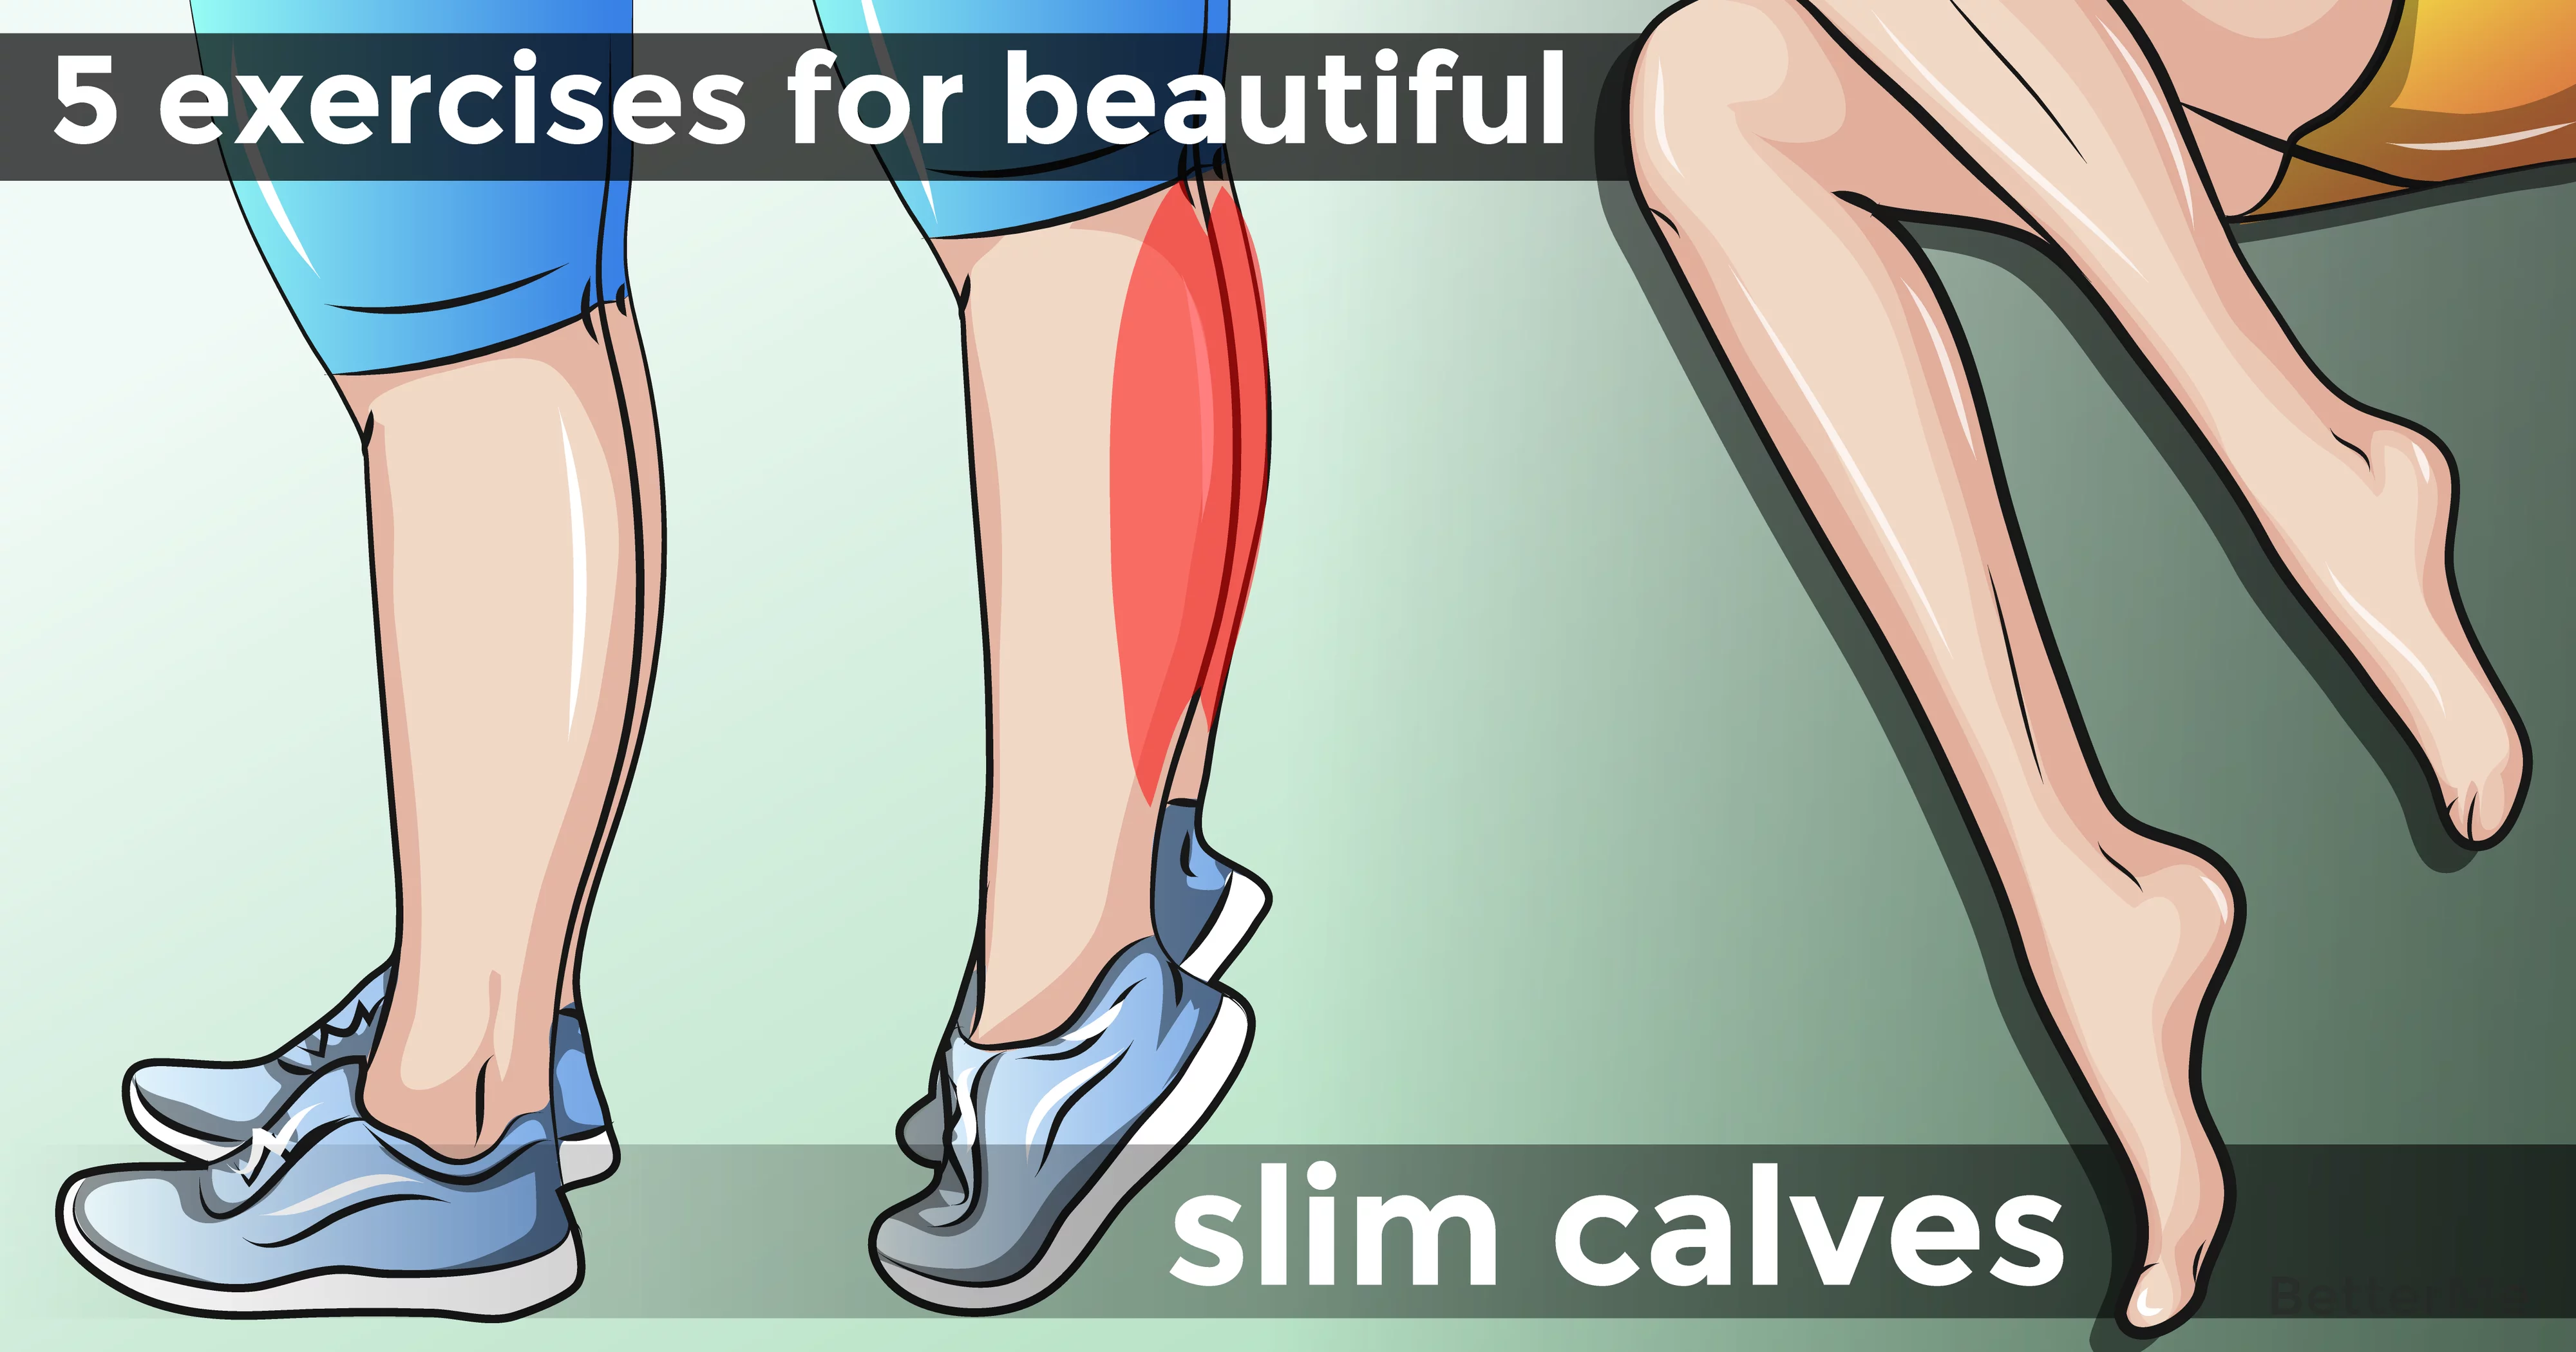 The top 5 exercises for slim and beautiful calves